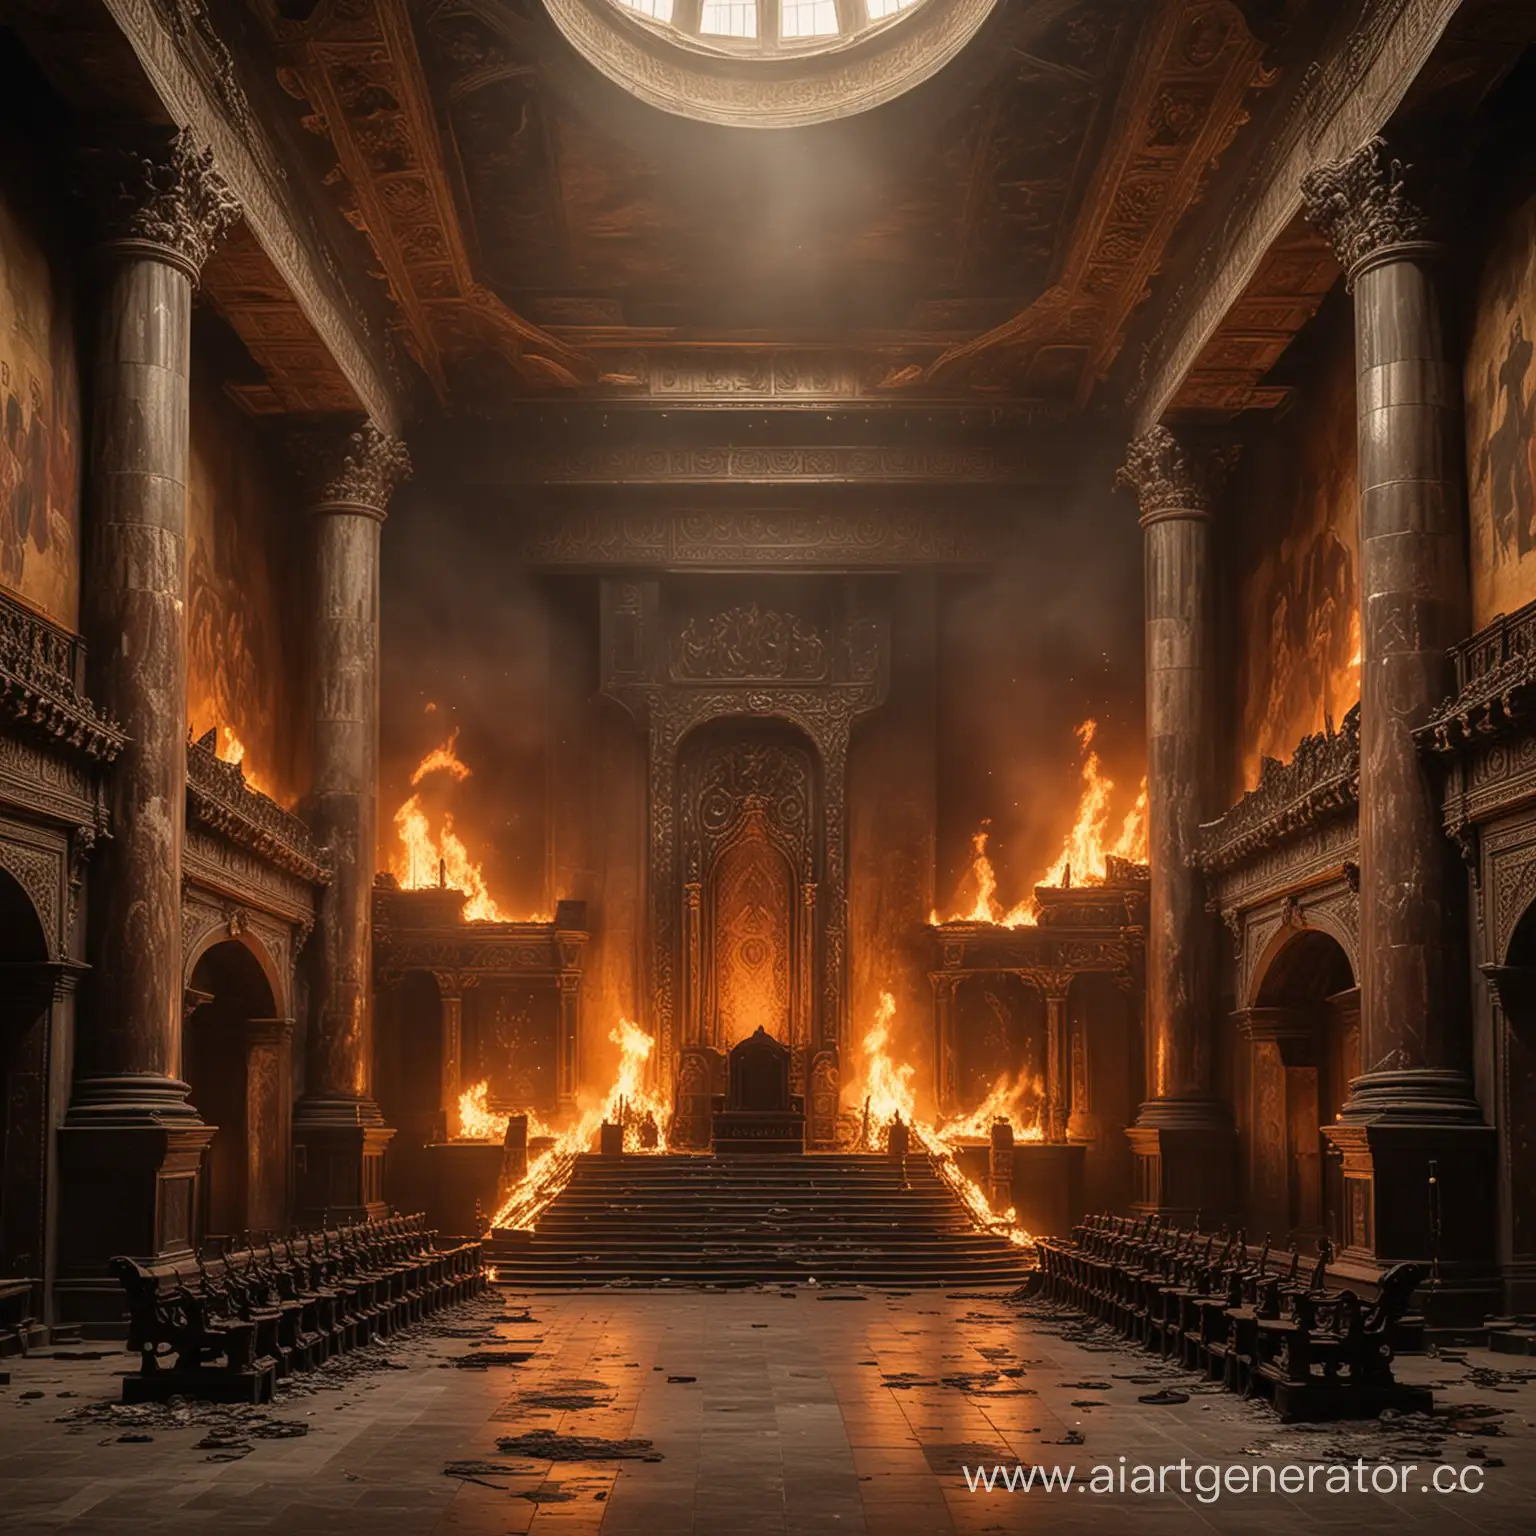 Empty-Throne-Room-Engulfed-in-Flames